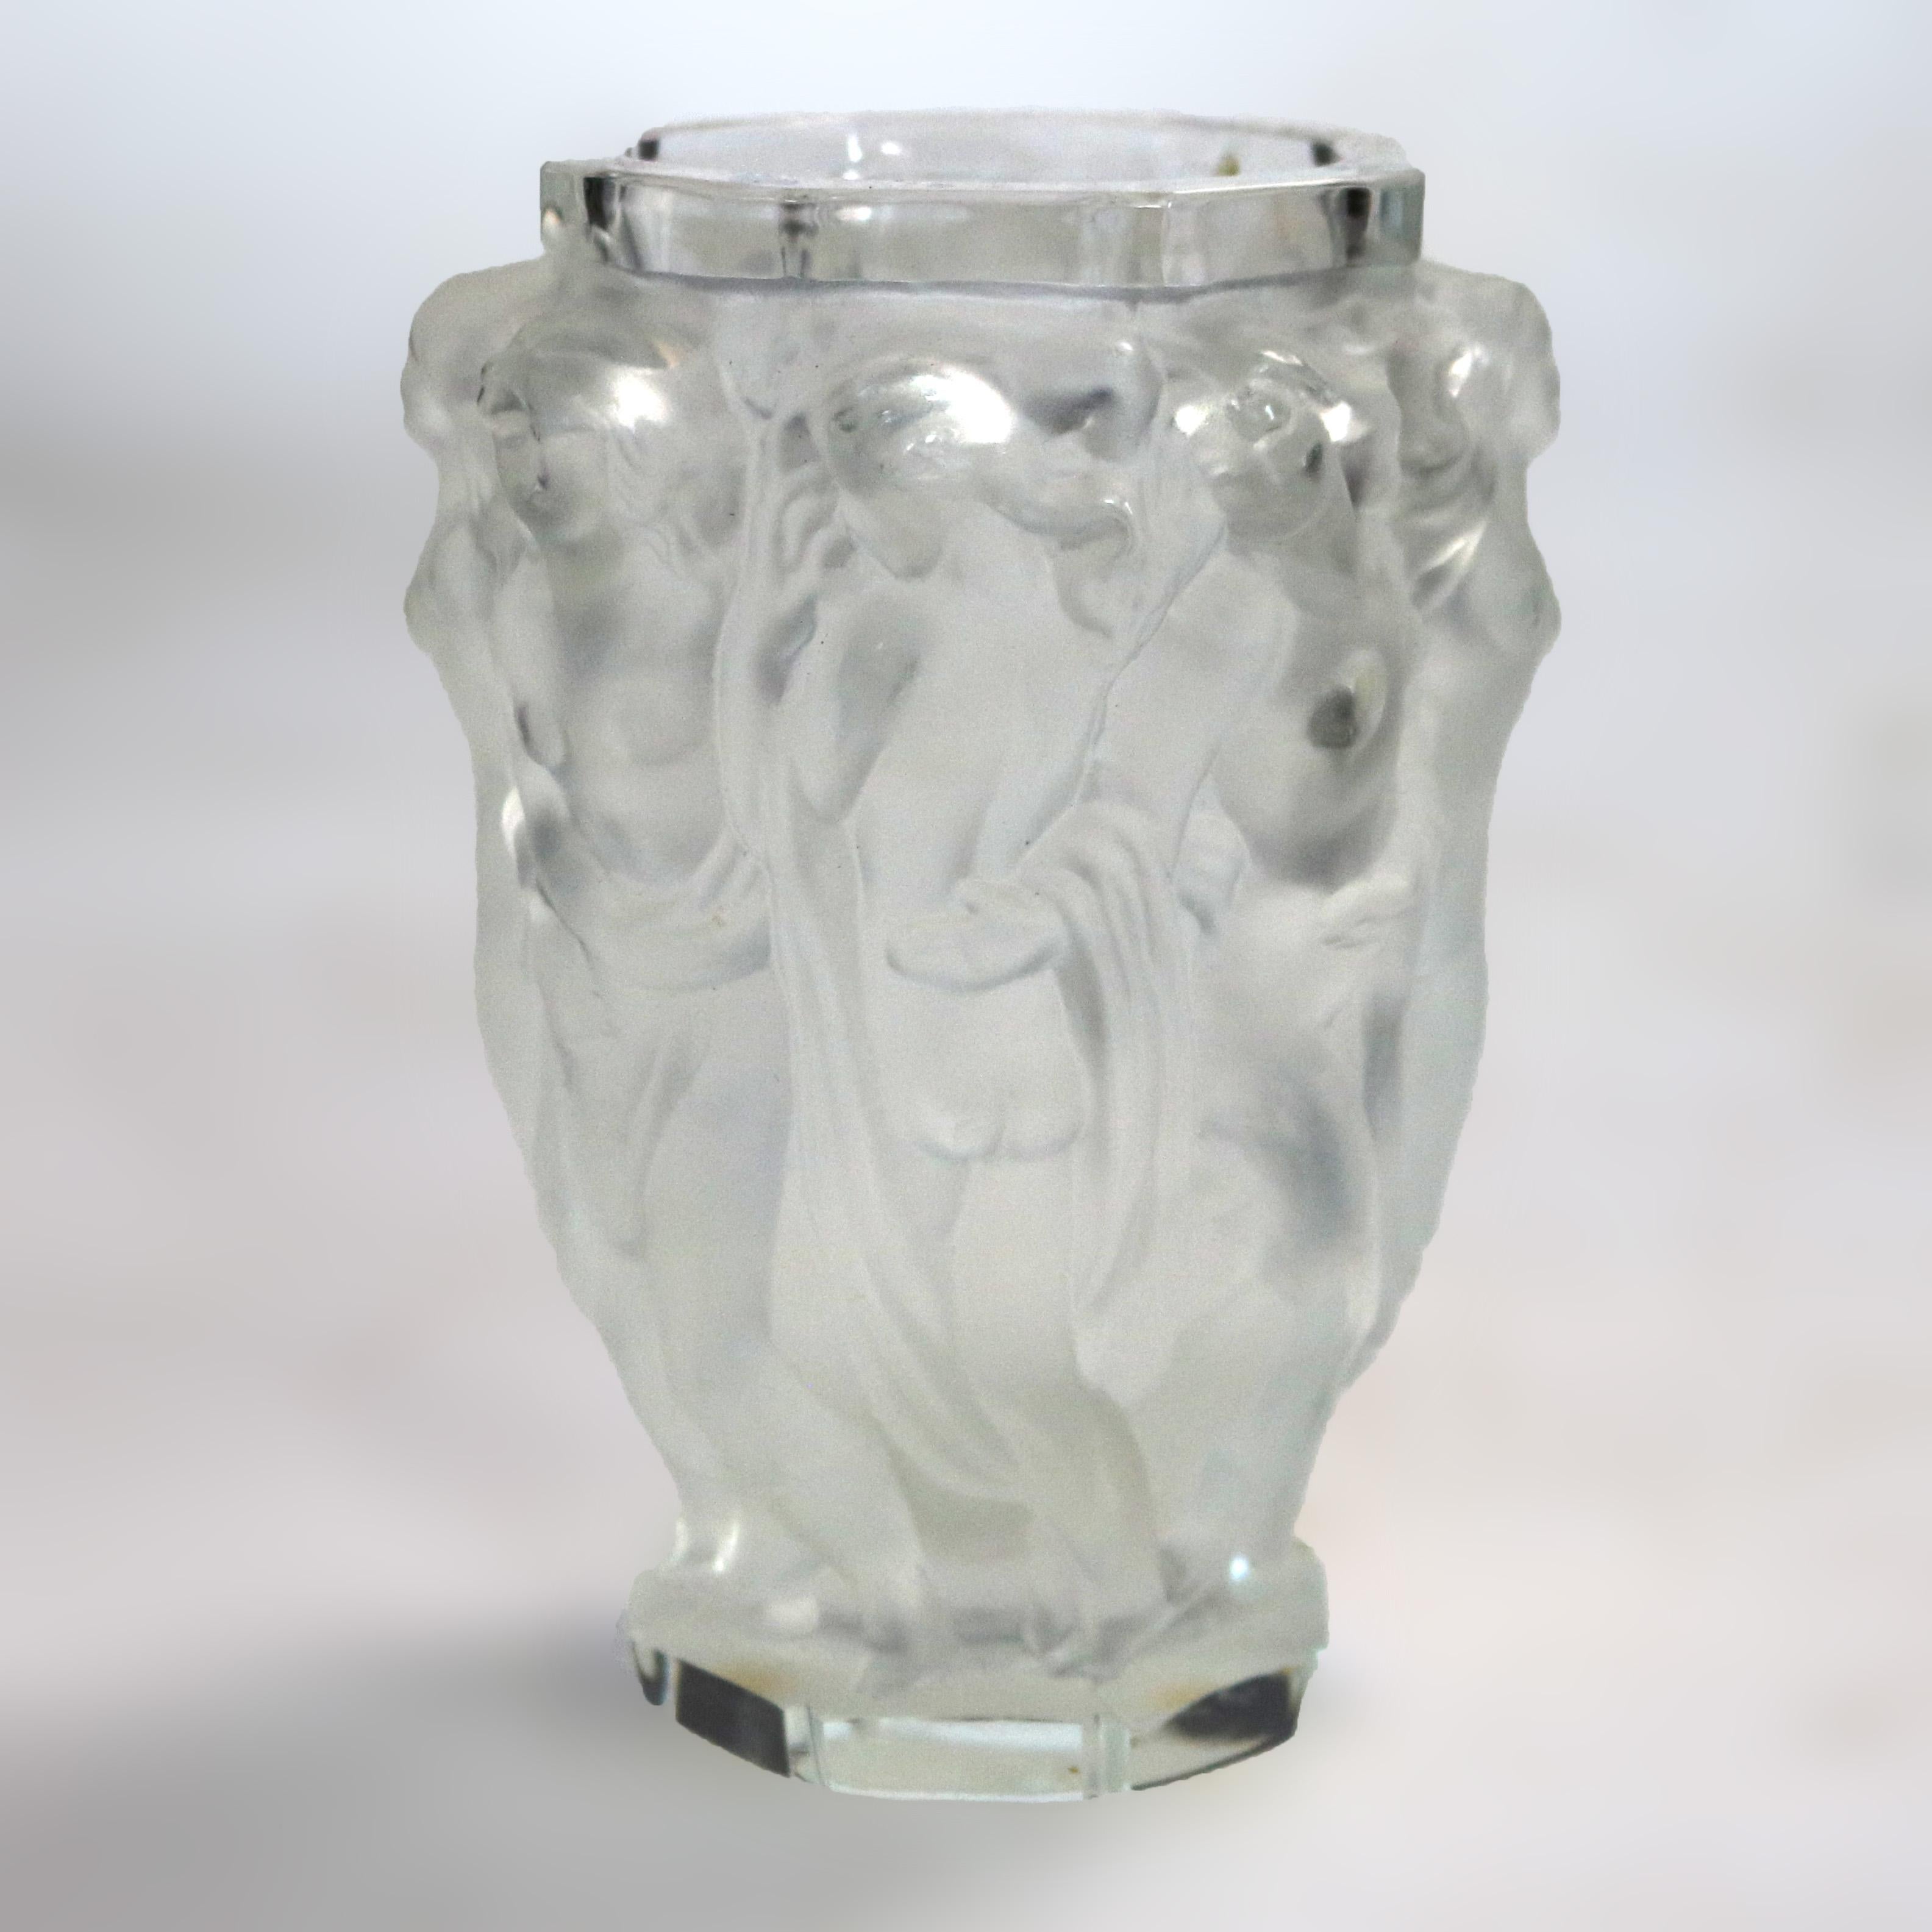 A French Lalique style Art Deco vase offers art glass construction with women in relief, signed FH as photographed, circa 1920.

Measures - 5.75